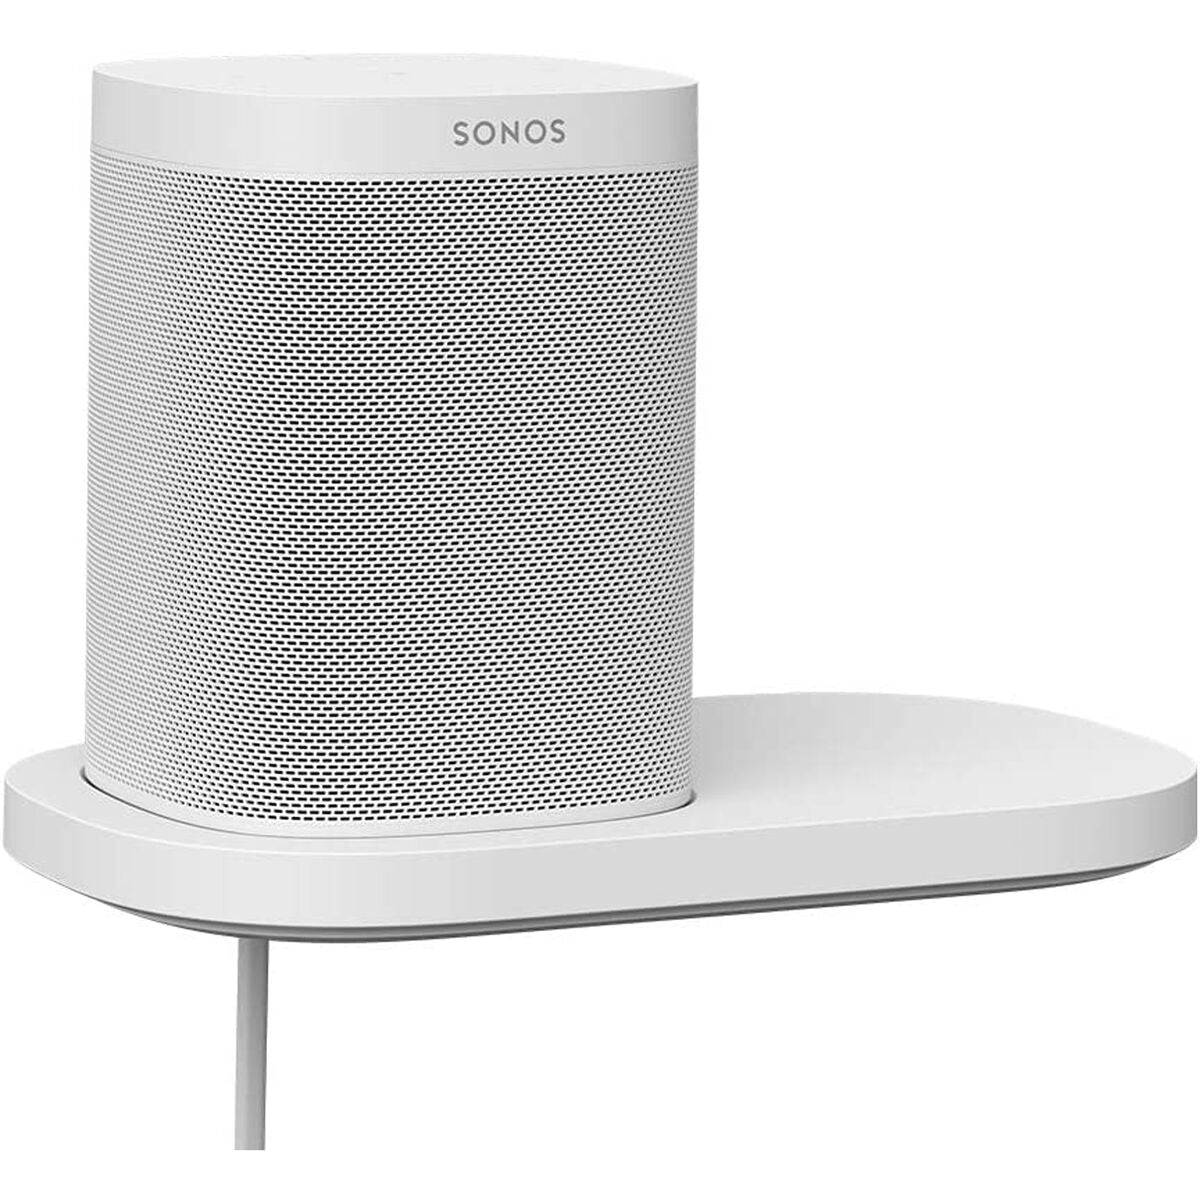 Speaker Stand Sonos ONE and PLAY White, Sonos, Electronics, Audio and Hi-Fi equipment, speaker-stand-sonos-one-and-play-white, Brand_Sonos, category-reference-2609, category-reference-2637, category-reference-2882, category-reference-t-19653, category-reference-t-19899, category-reference-t-21329, category-reference-t-25554, category-reference-t-7441, cinema and television, Condition_NEW, music, Price_50 - 100, RiotNook